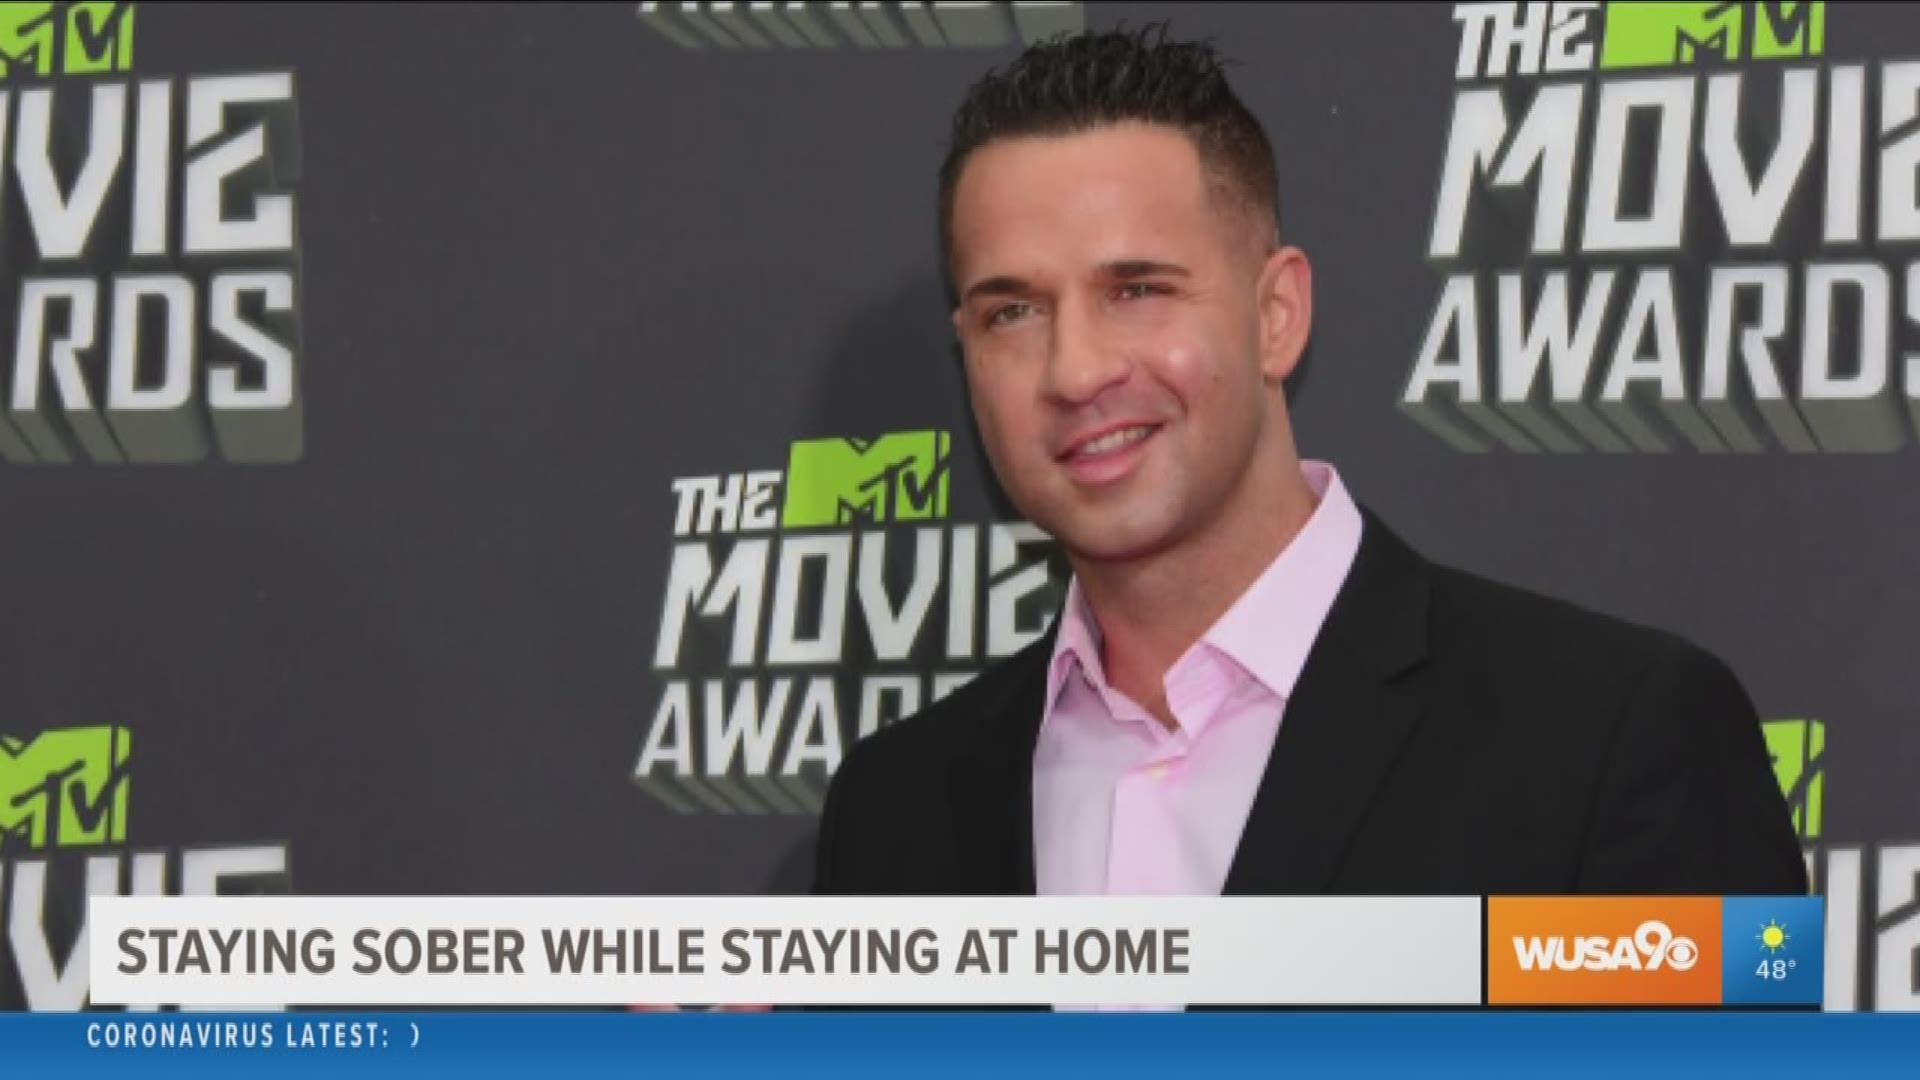 Mike "The Situation" Sorrento shares tips on staying sober while adhering to many state mandated stay-at-home orders.